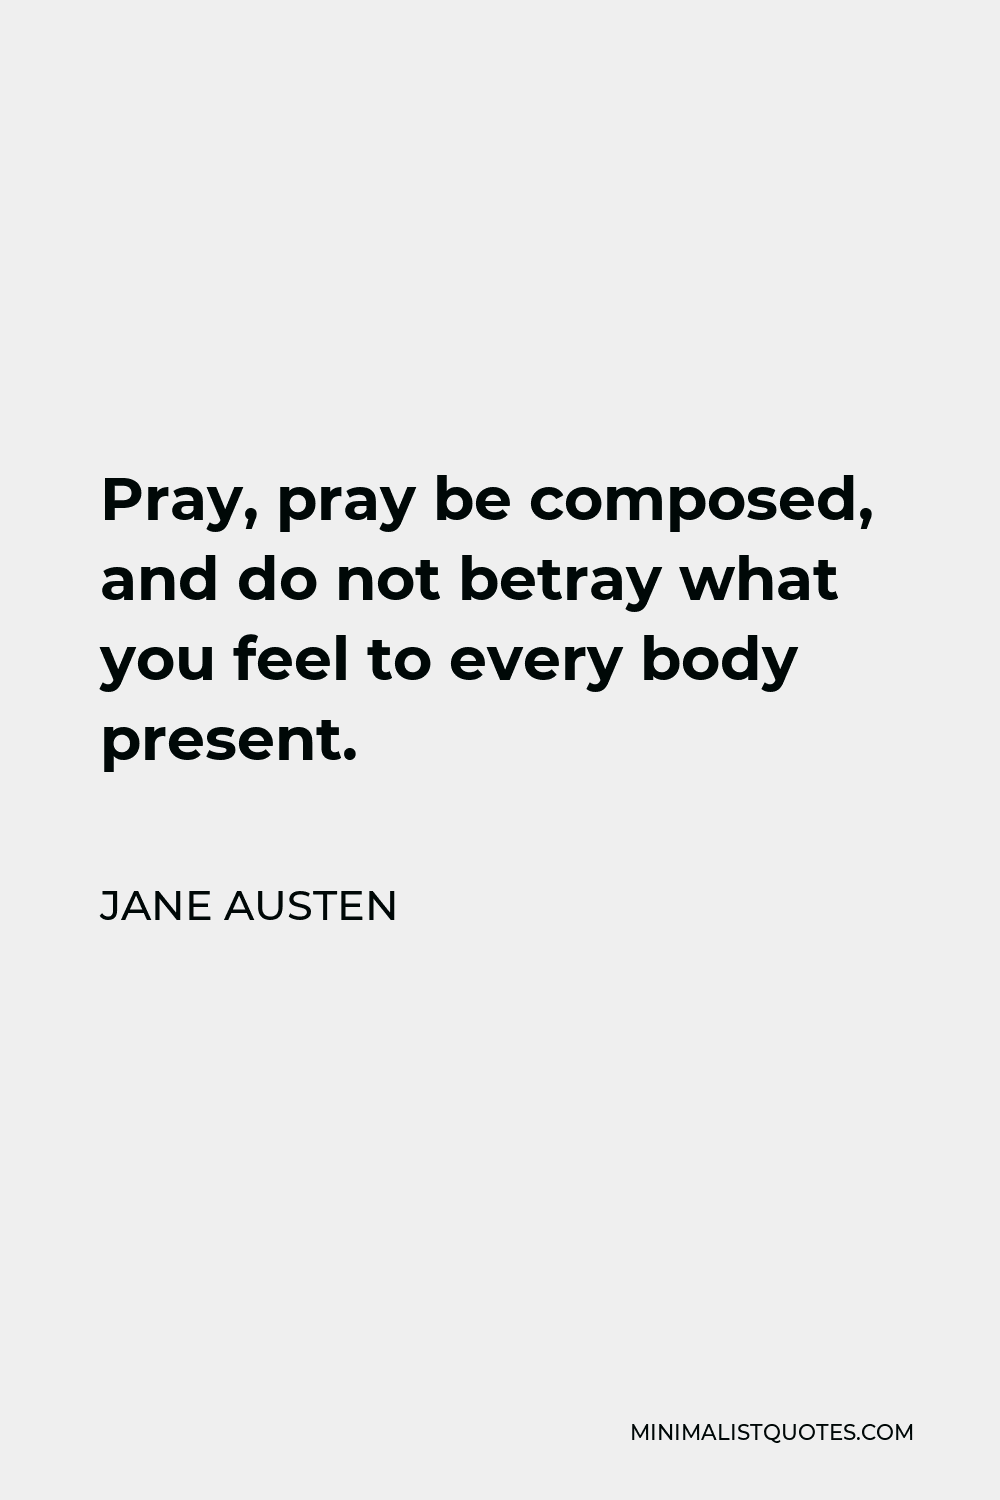 Jane Austen Quote - Pray, pray be composed, and do not betray what you feel to every body present.